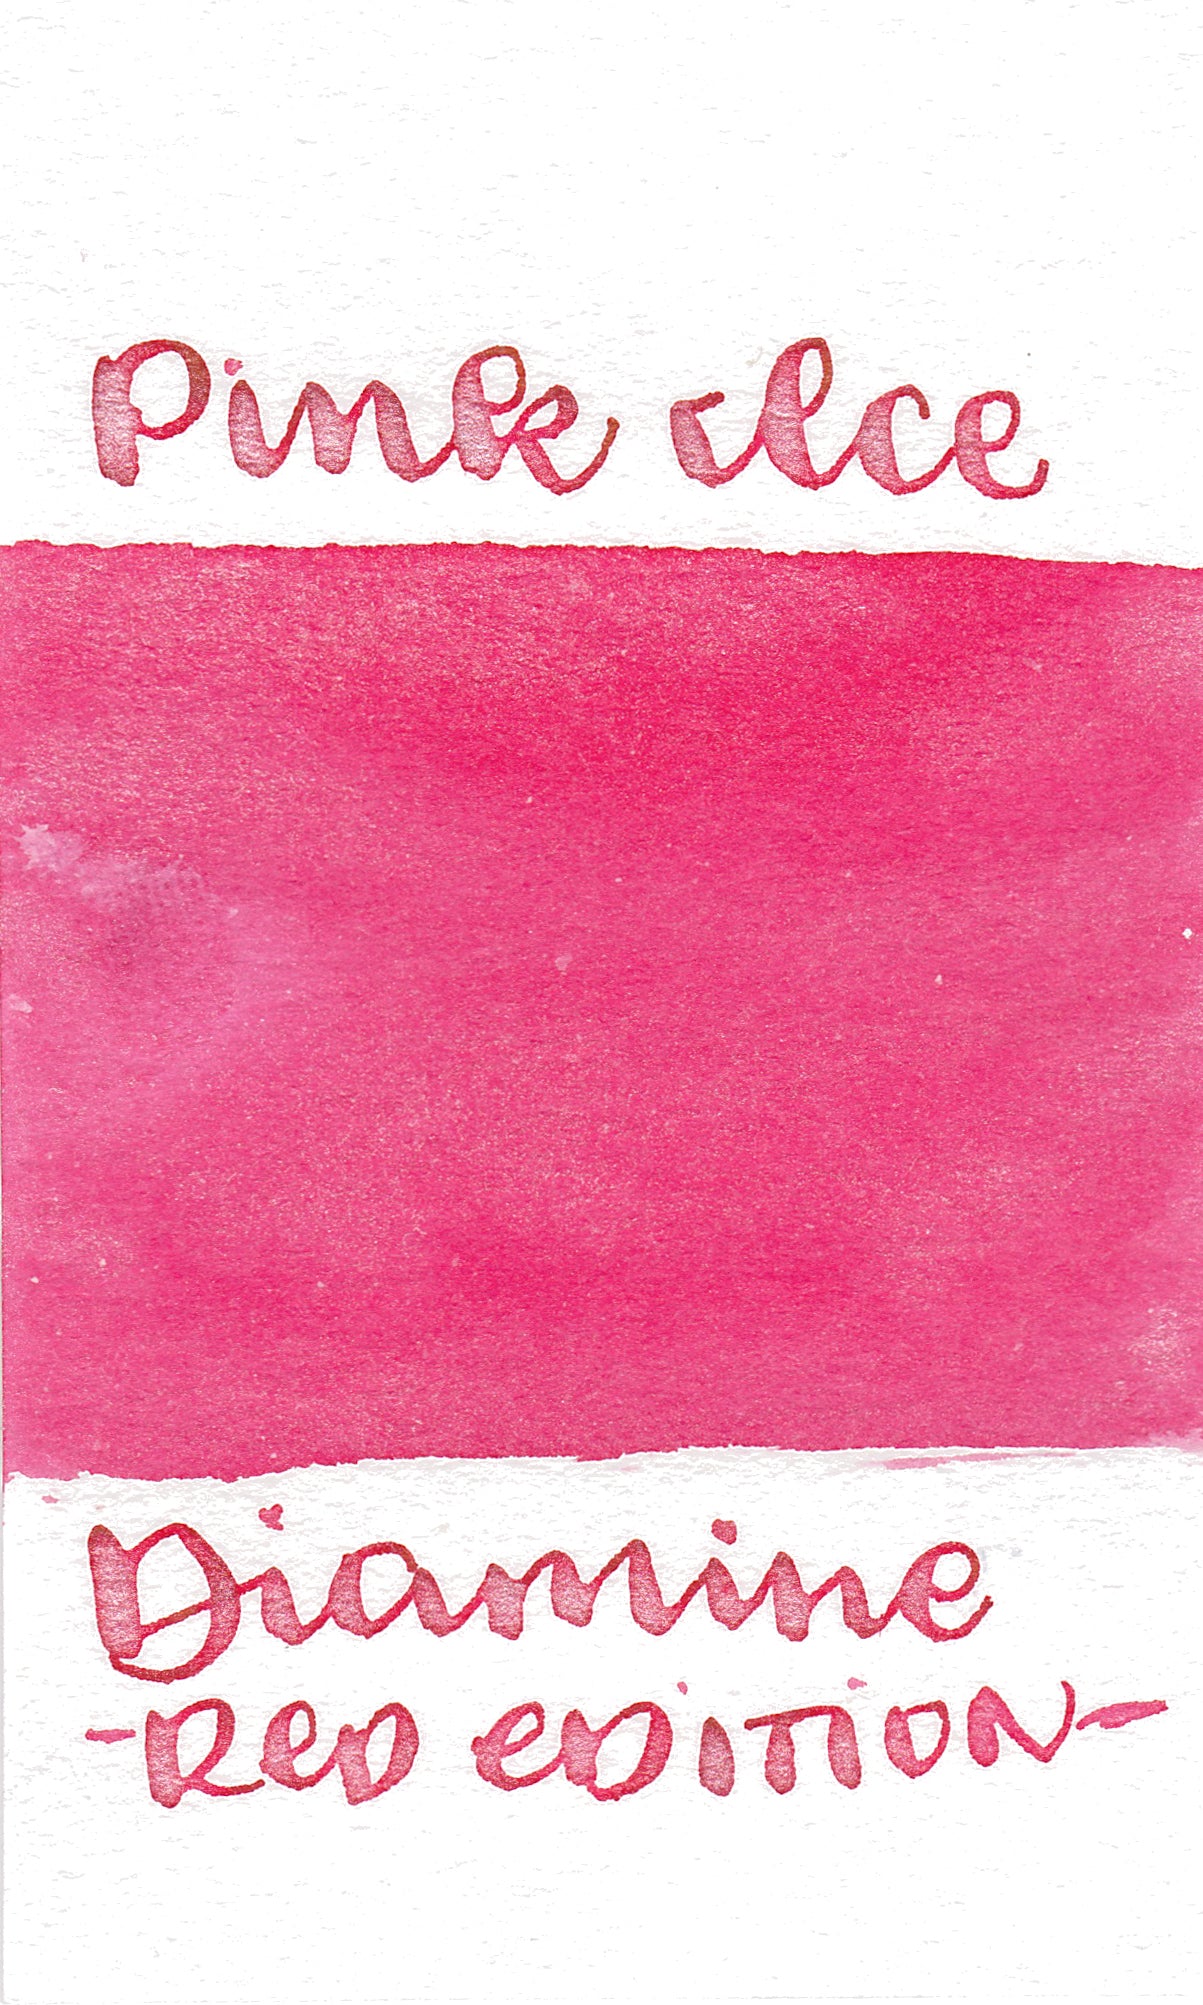 Diamine Red Edition Pink Ice Shimmer